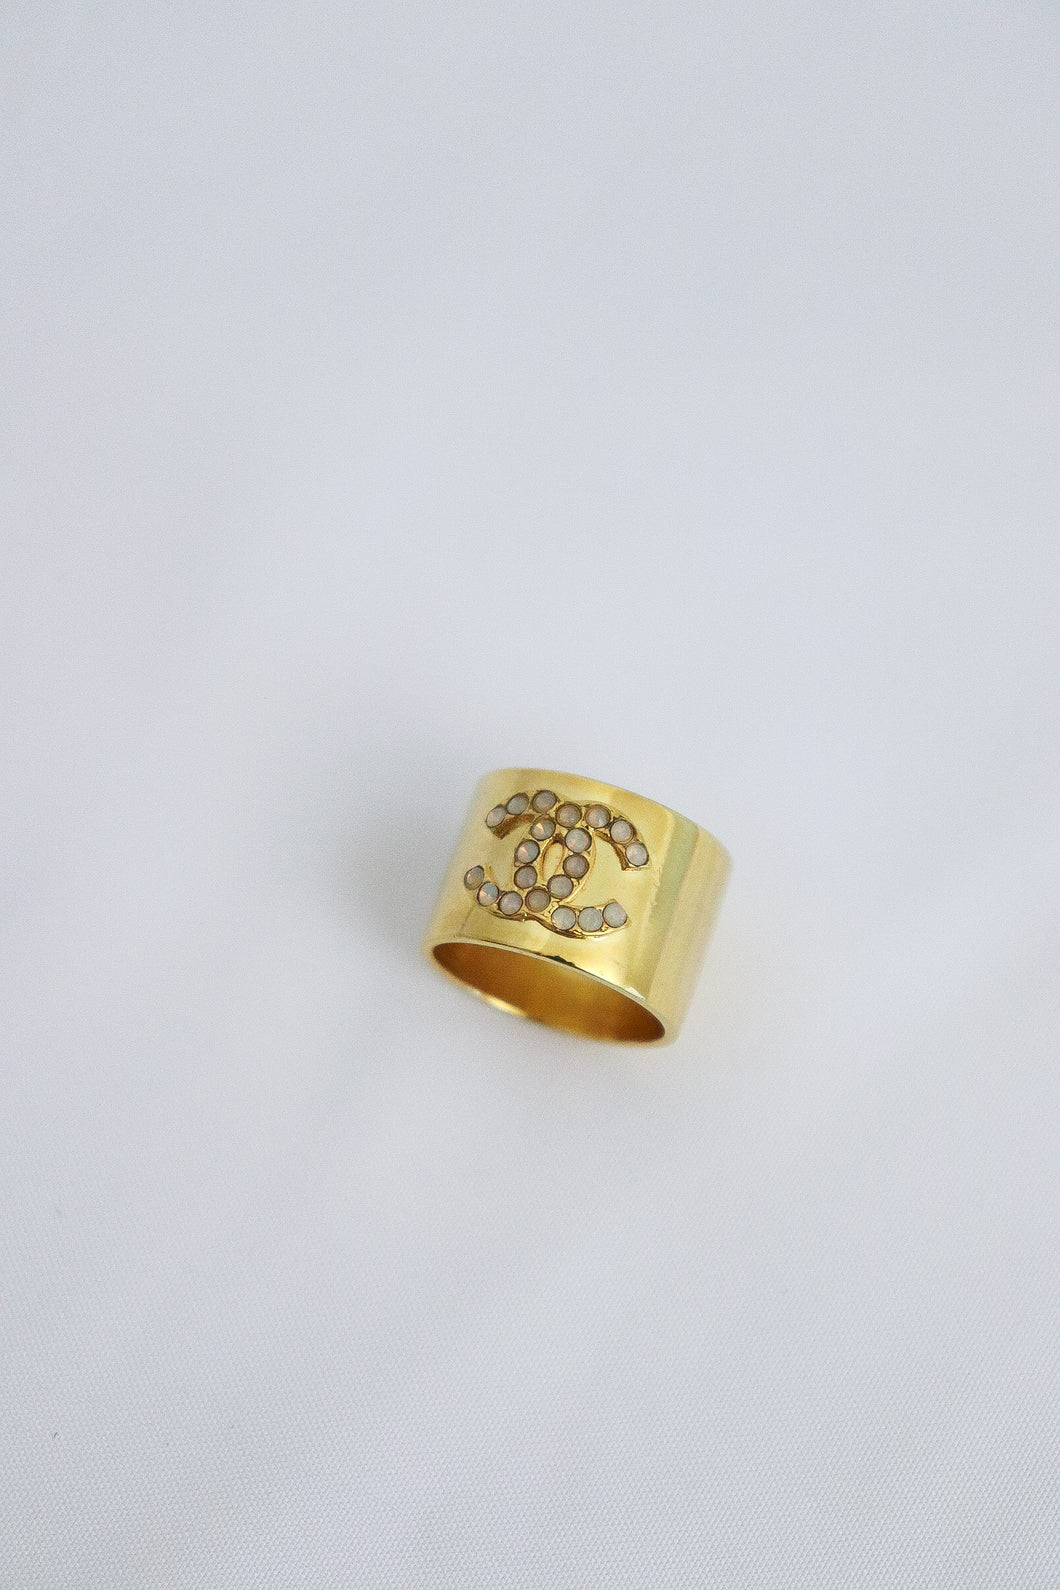 Chanel vintage gold tone ring with small crystals